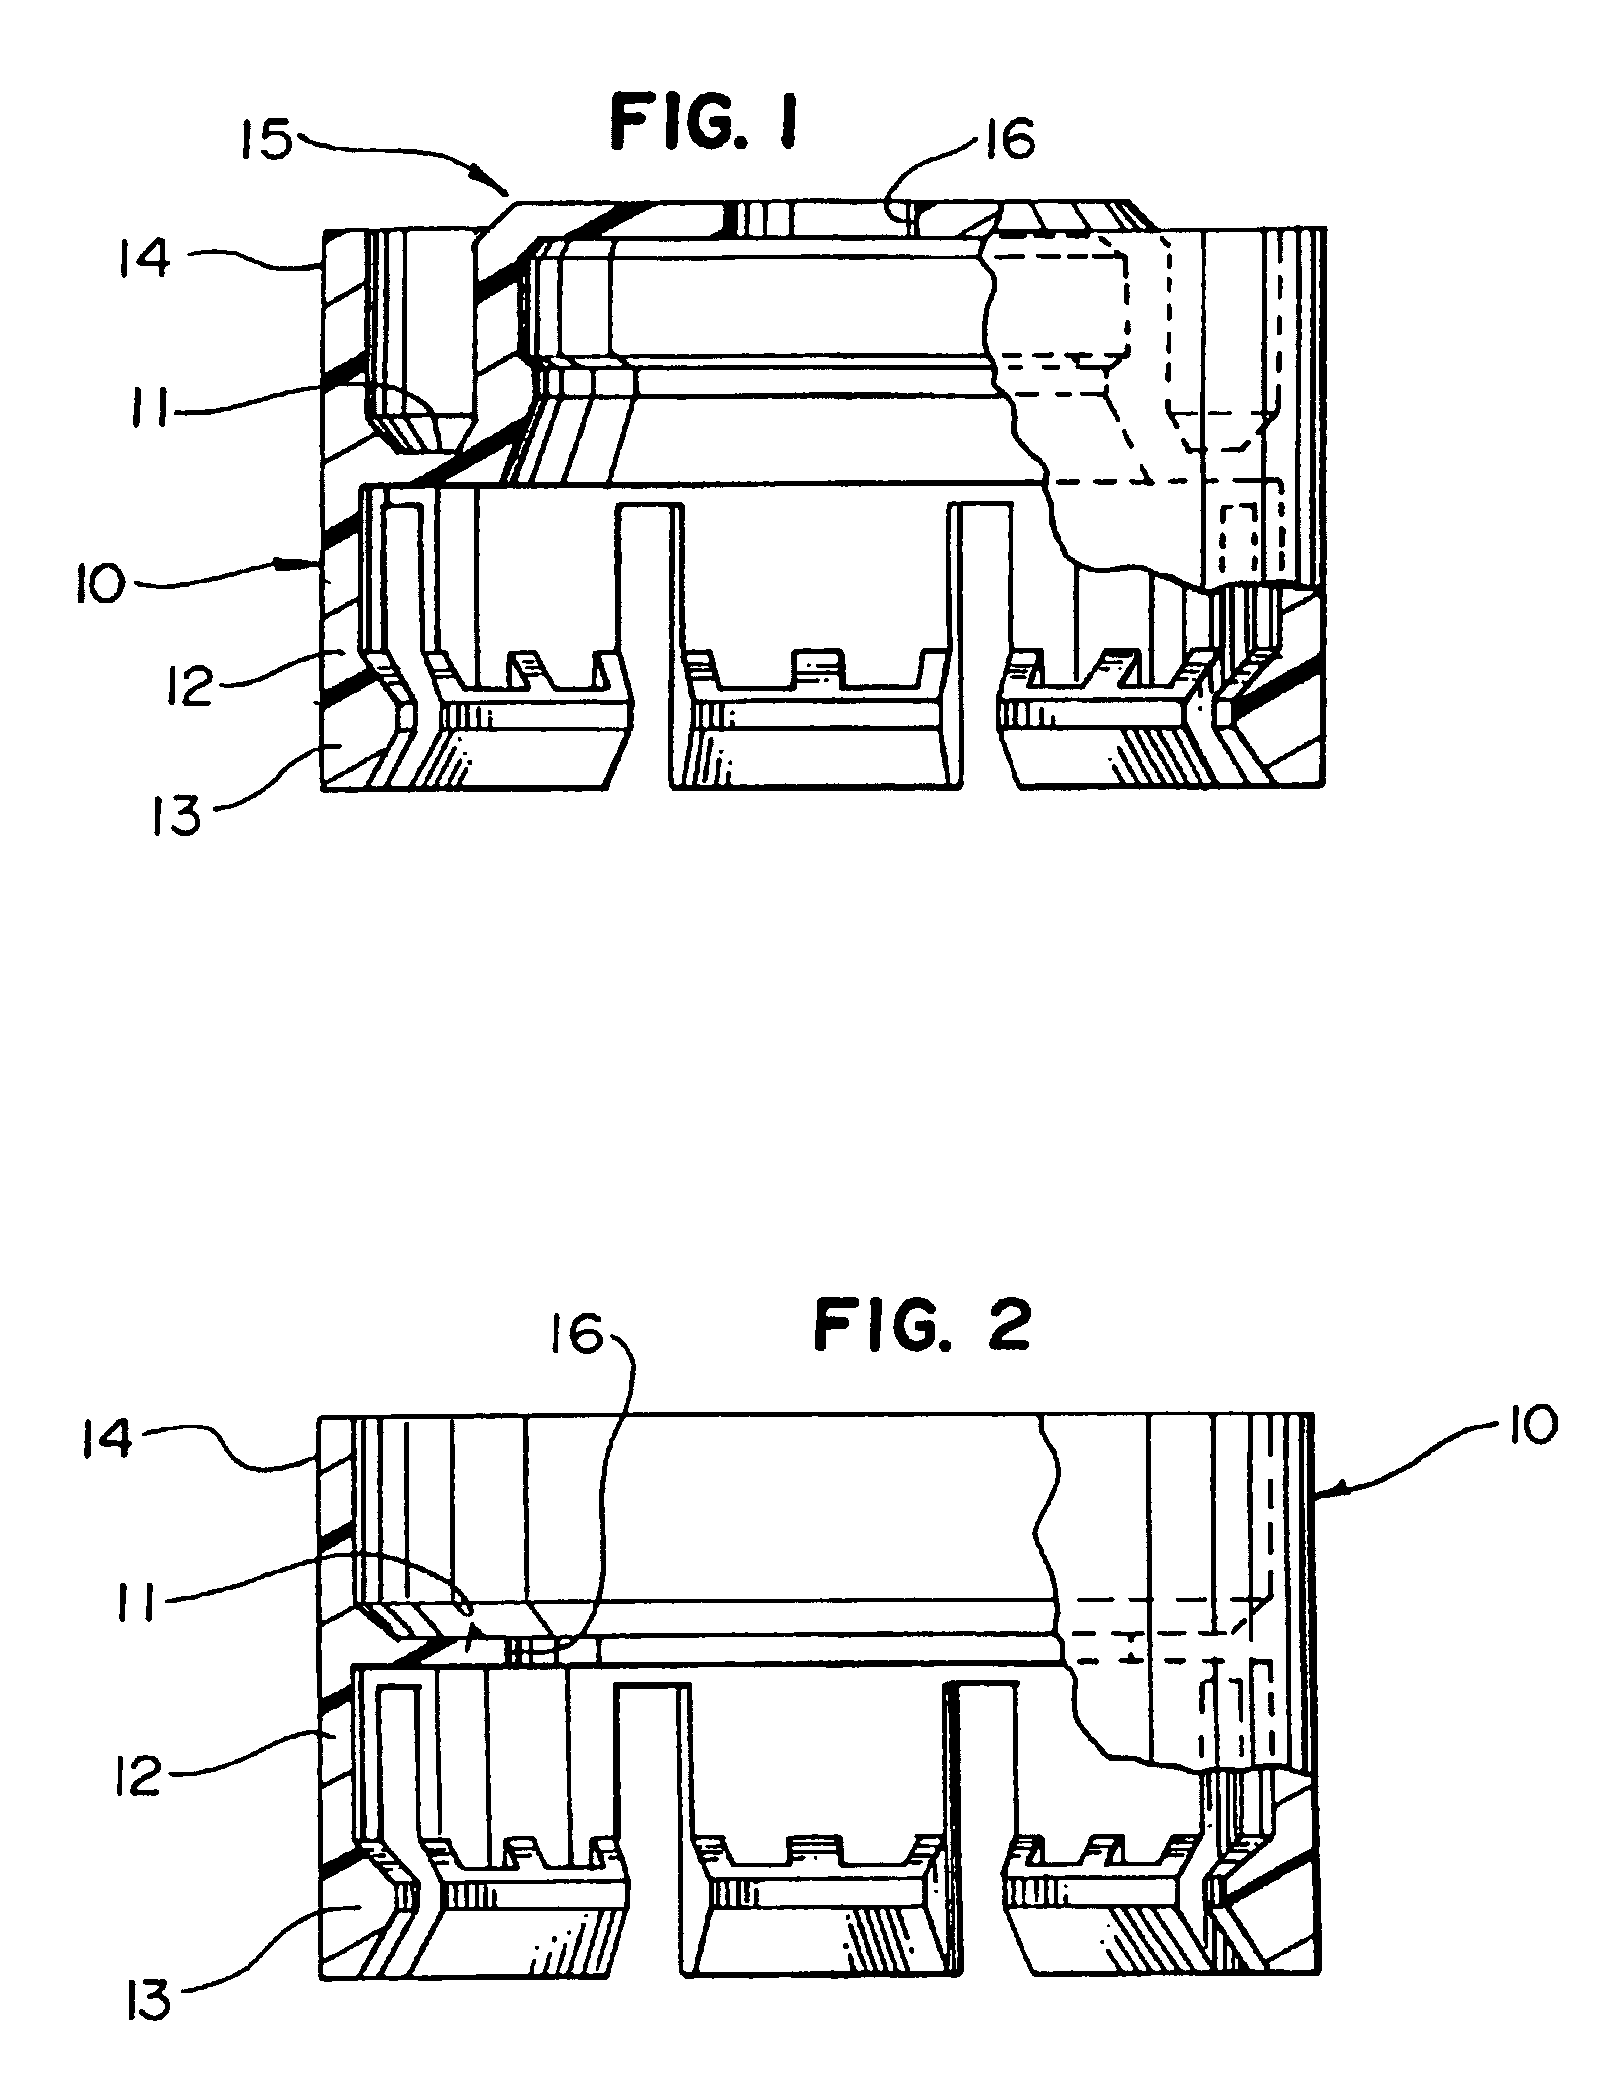 Device for attaching a dispenser member to a receptacle